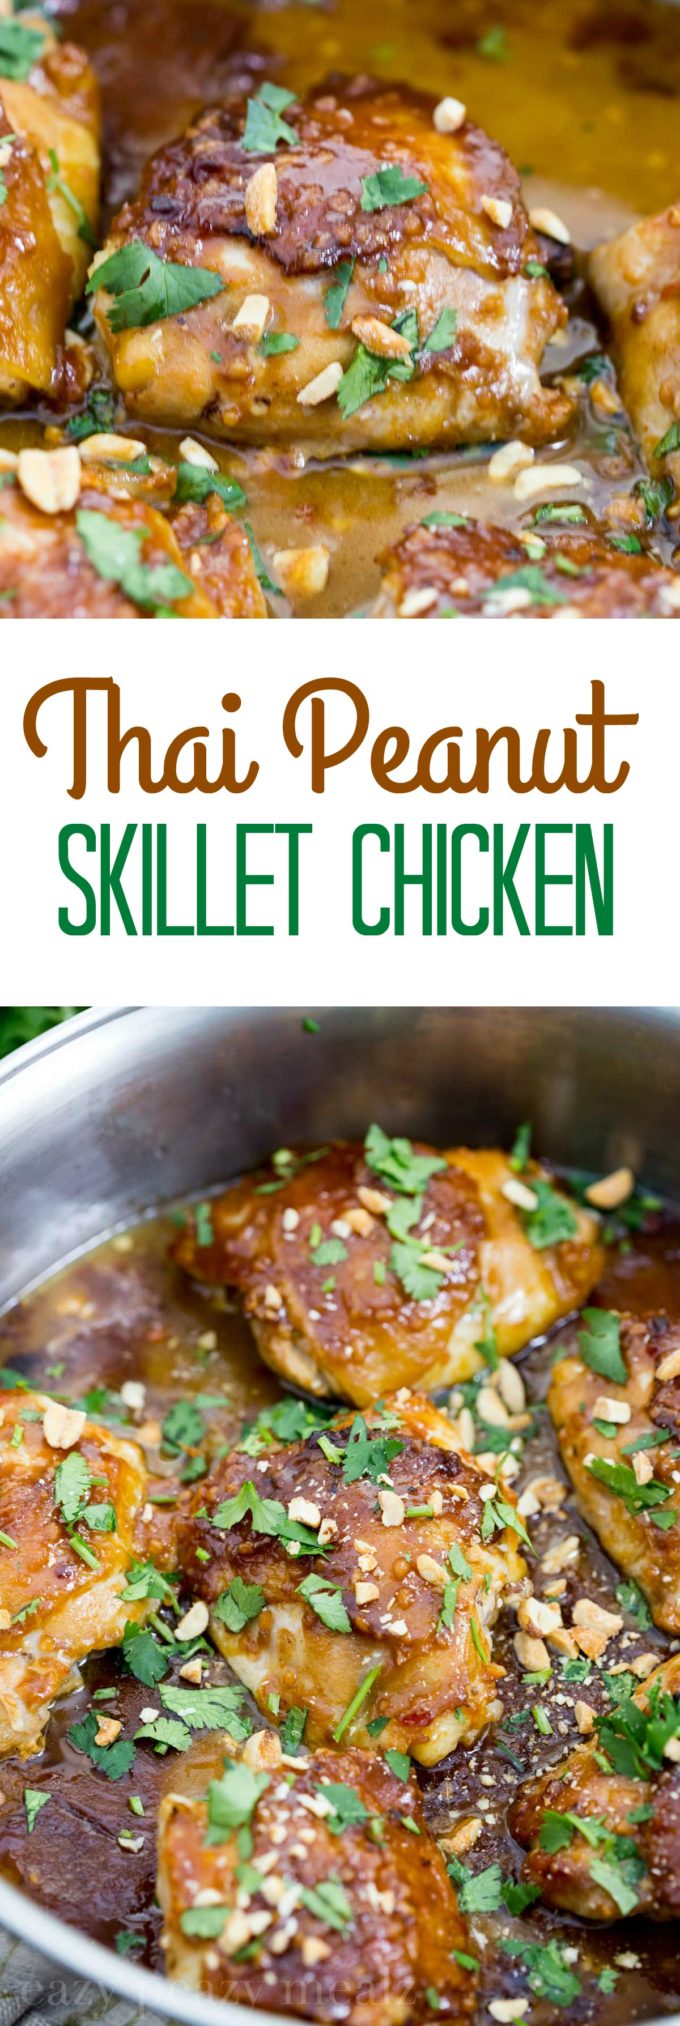 Thai Peanut skillet chicken, an easy one pot chicken that tastes great and bakes up to perfection. Mmmm